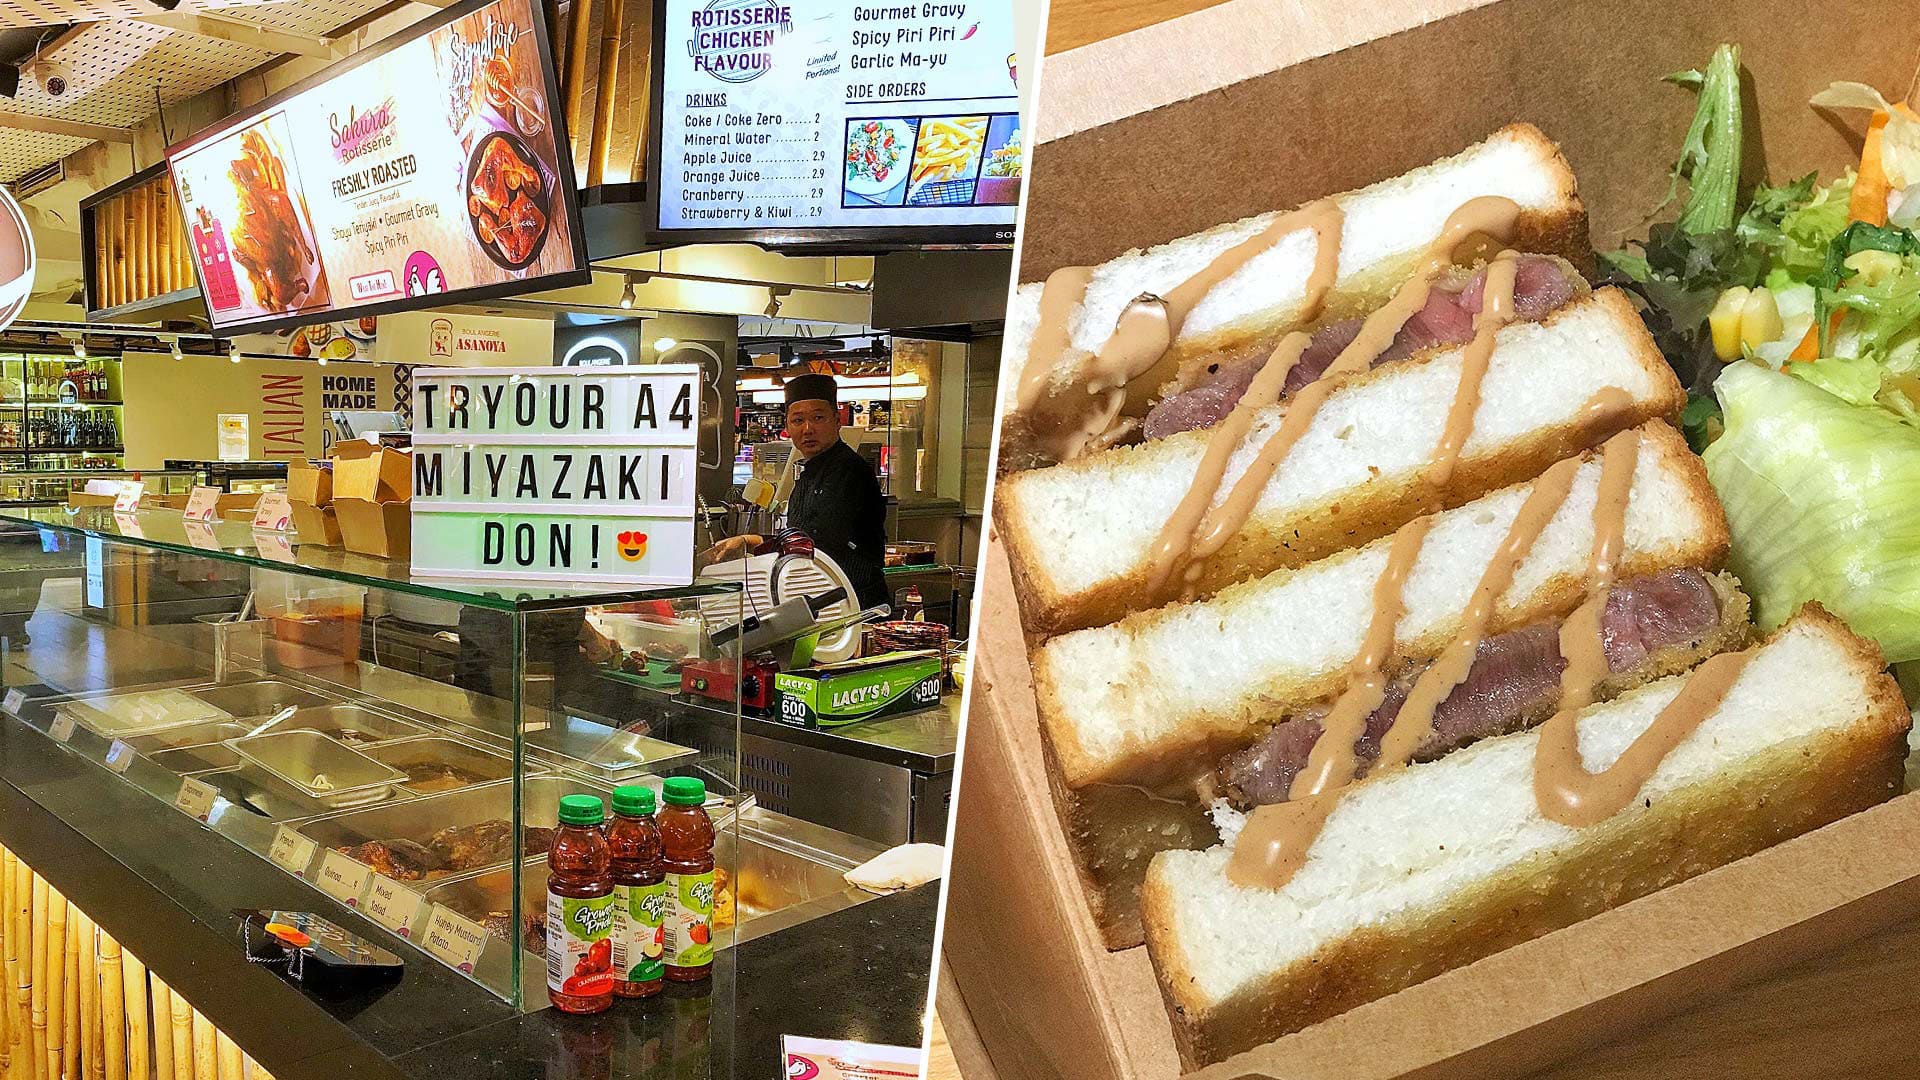 Orchard Road Kiosk Sells Affordable Wagyu Katsu Steak Sandwiches From $9.90